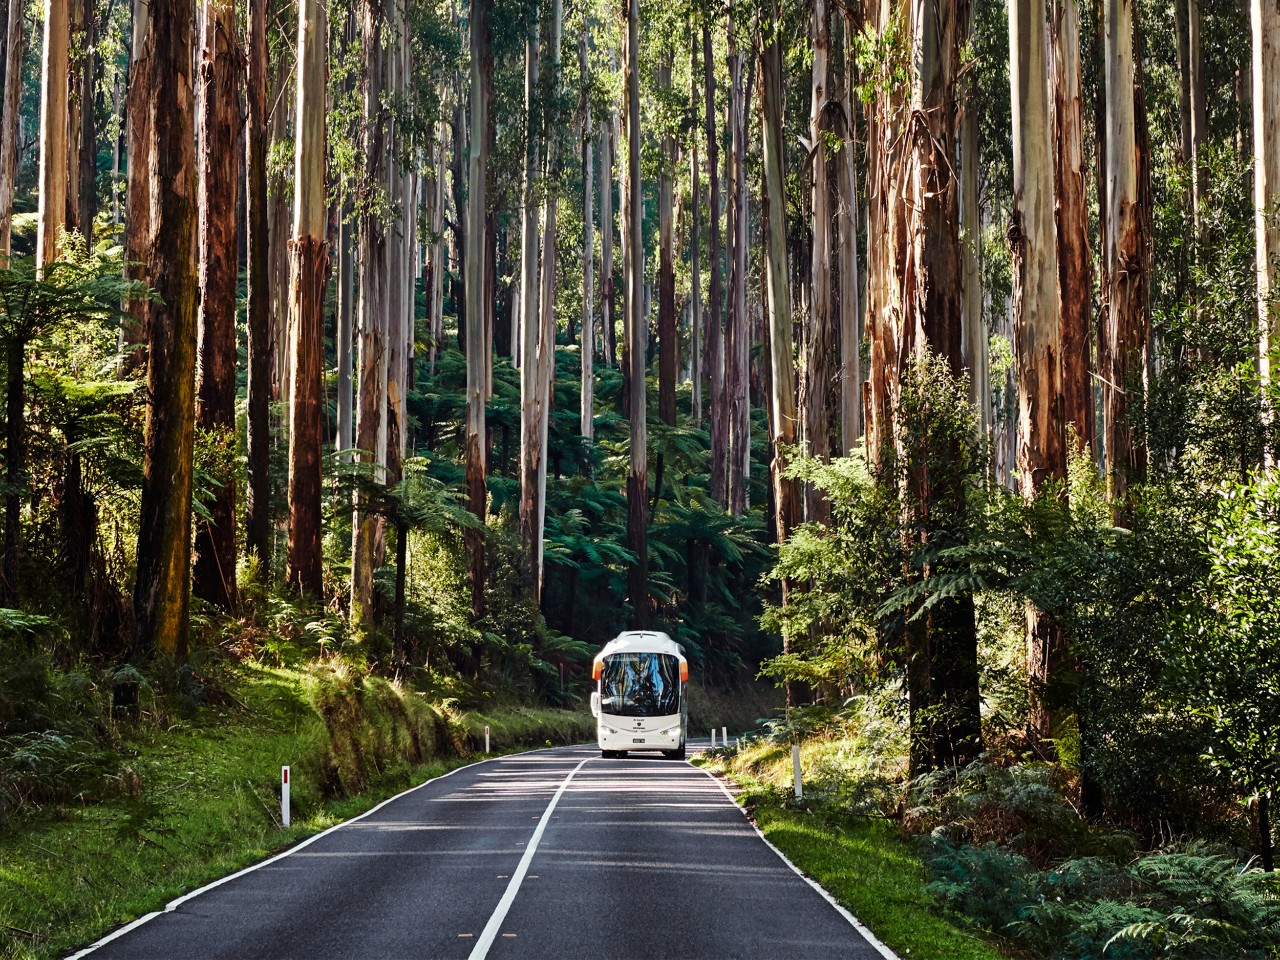  Bus driving in forrest